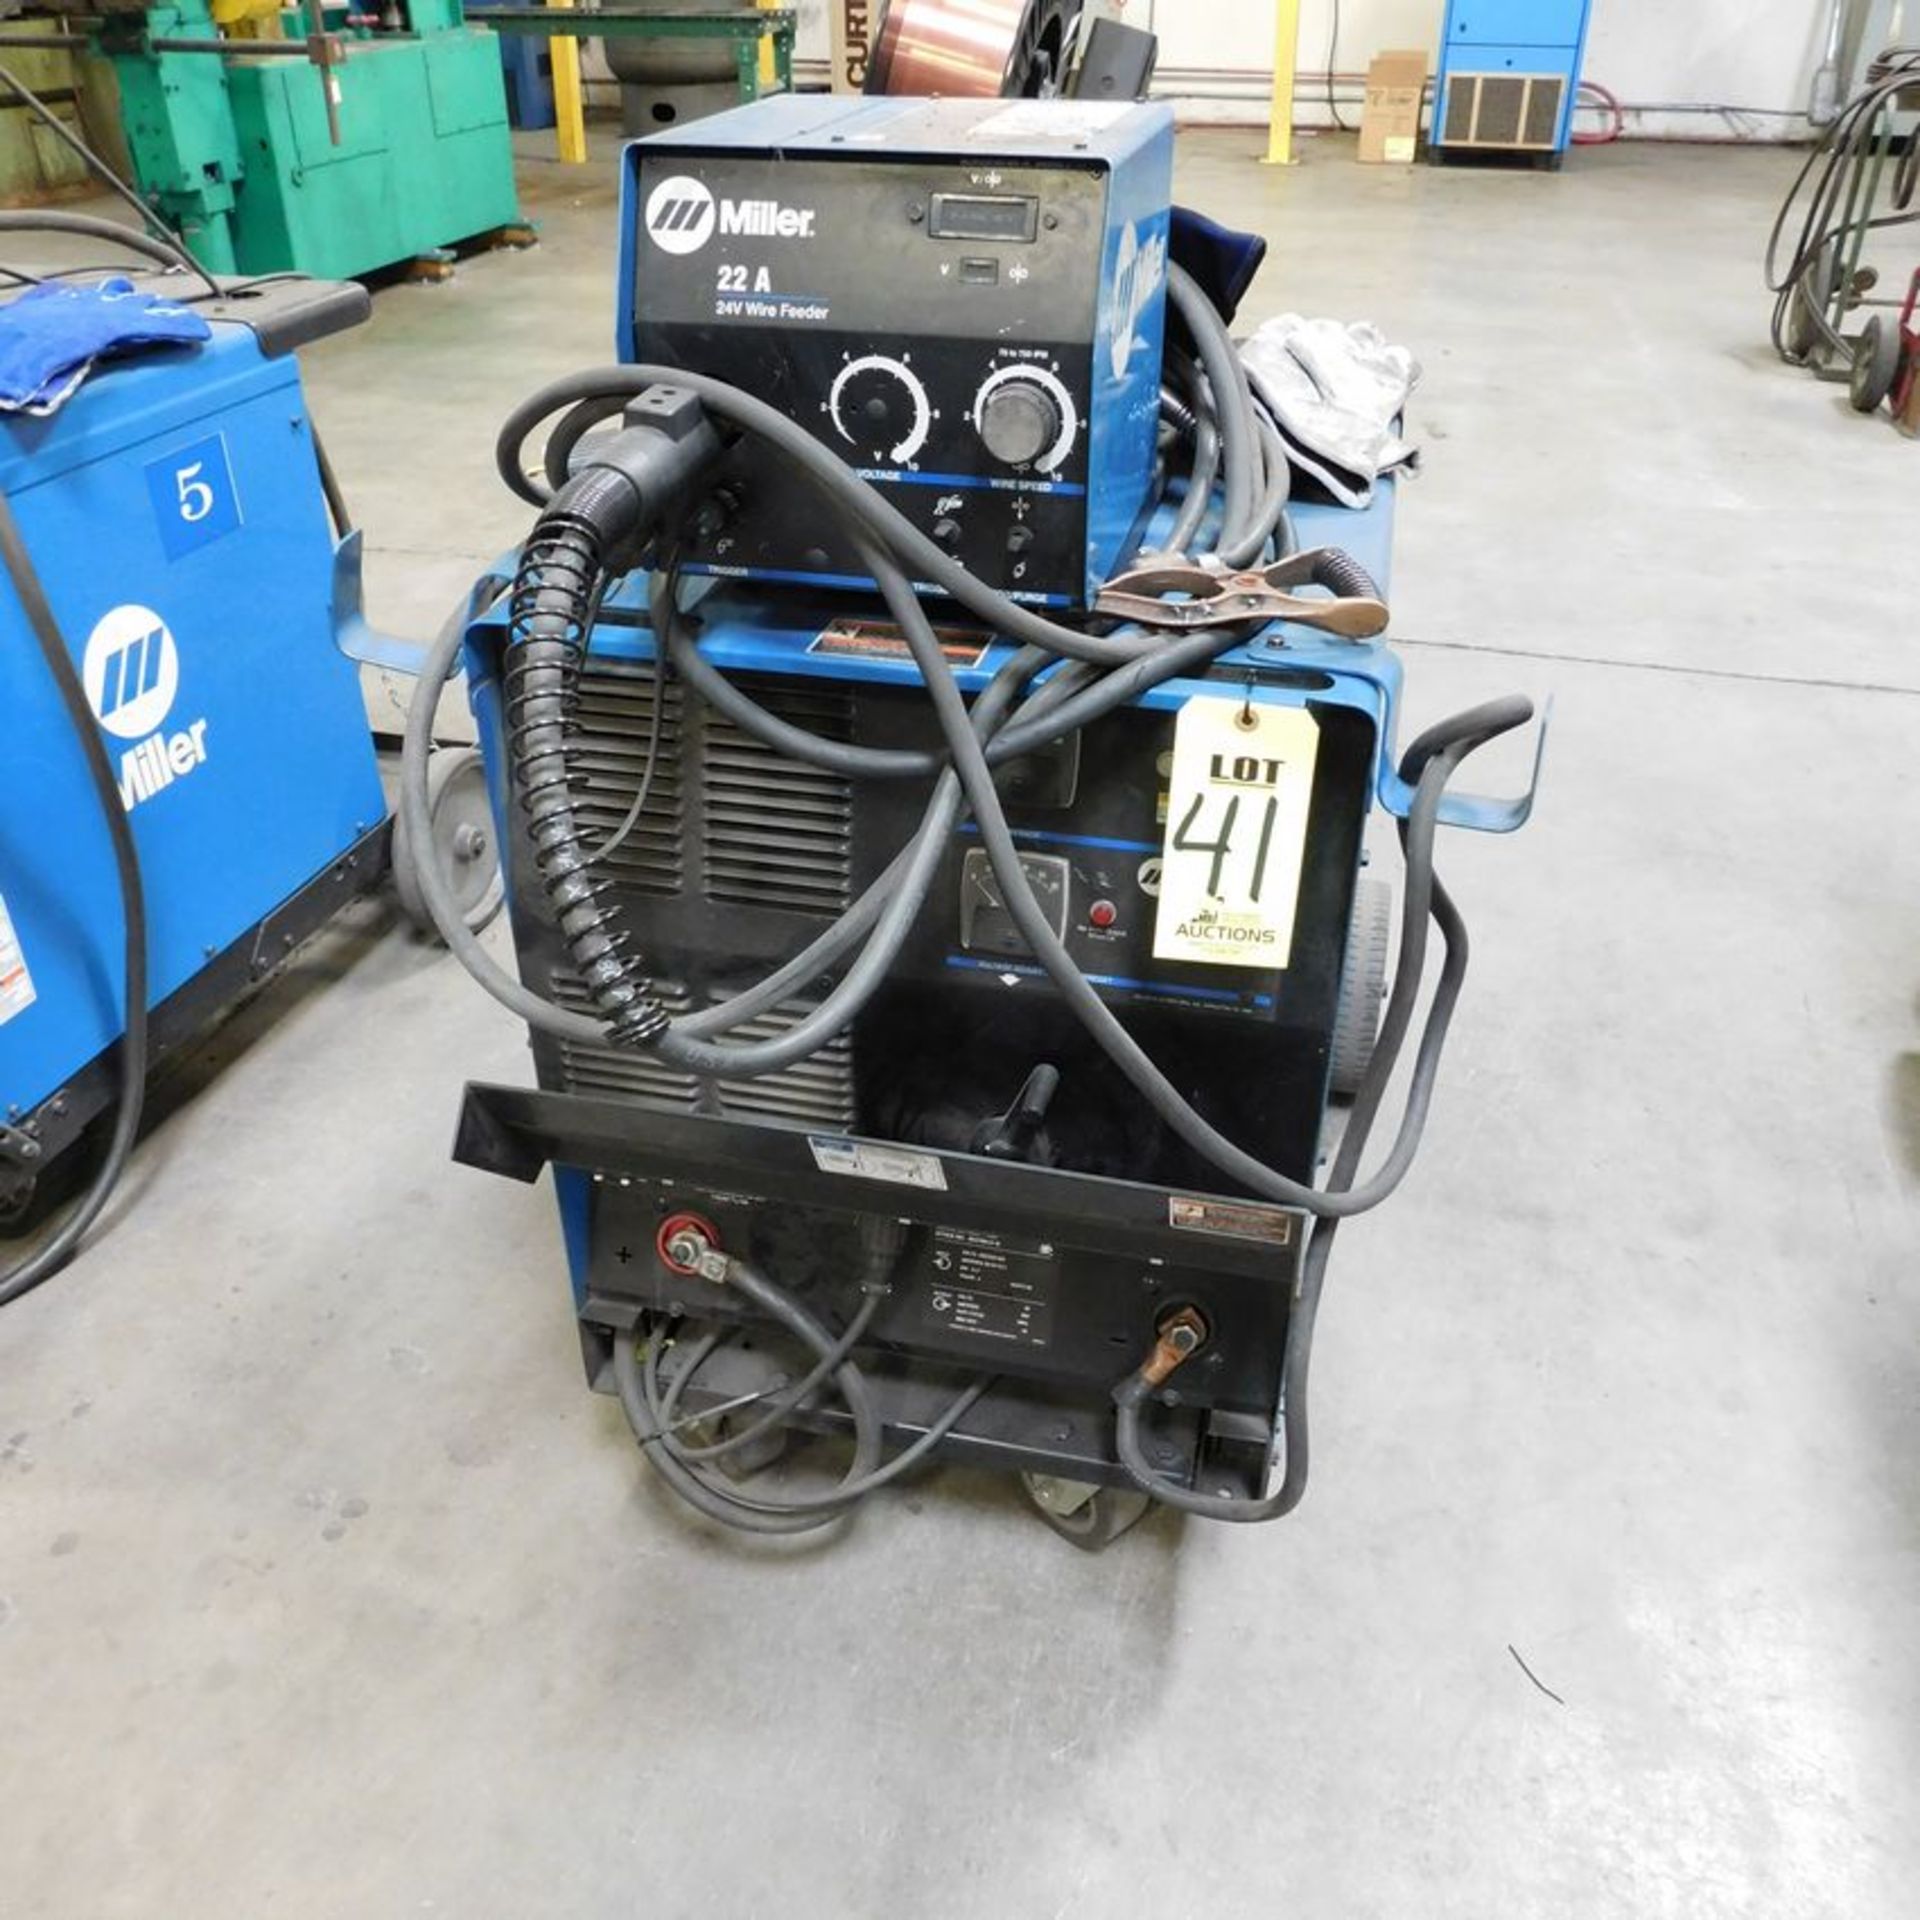 MILLER CP302 CV-DC WELDING POWER SOURCE W/22-A WIRE FEEDER, S/N MD311109V (ADVANCED RIGGERS &